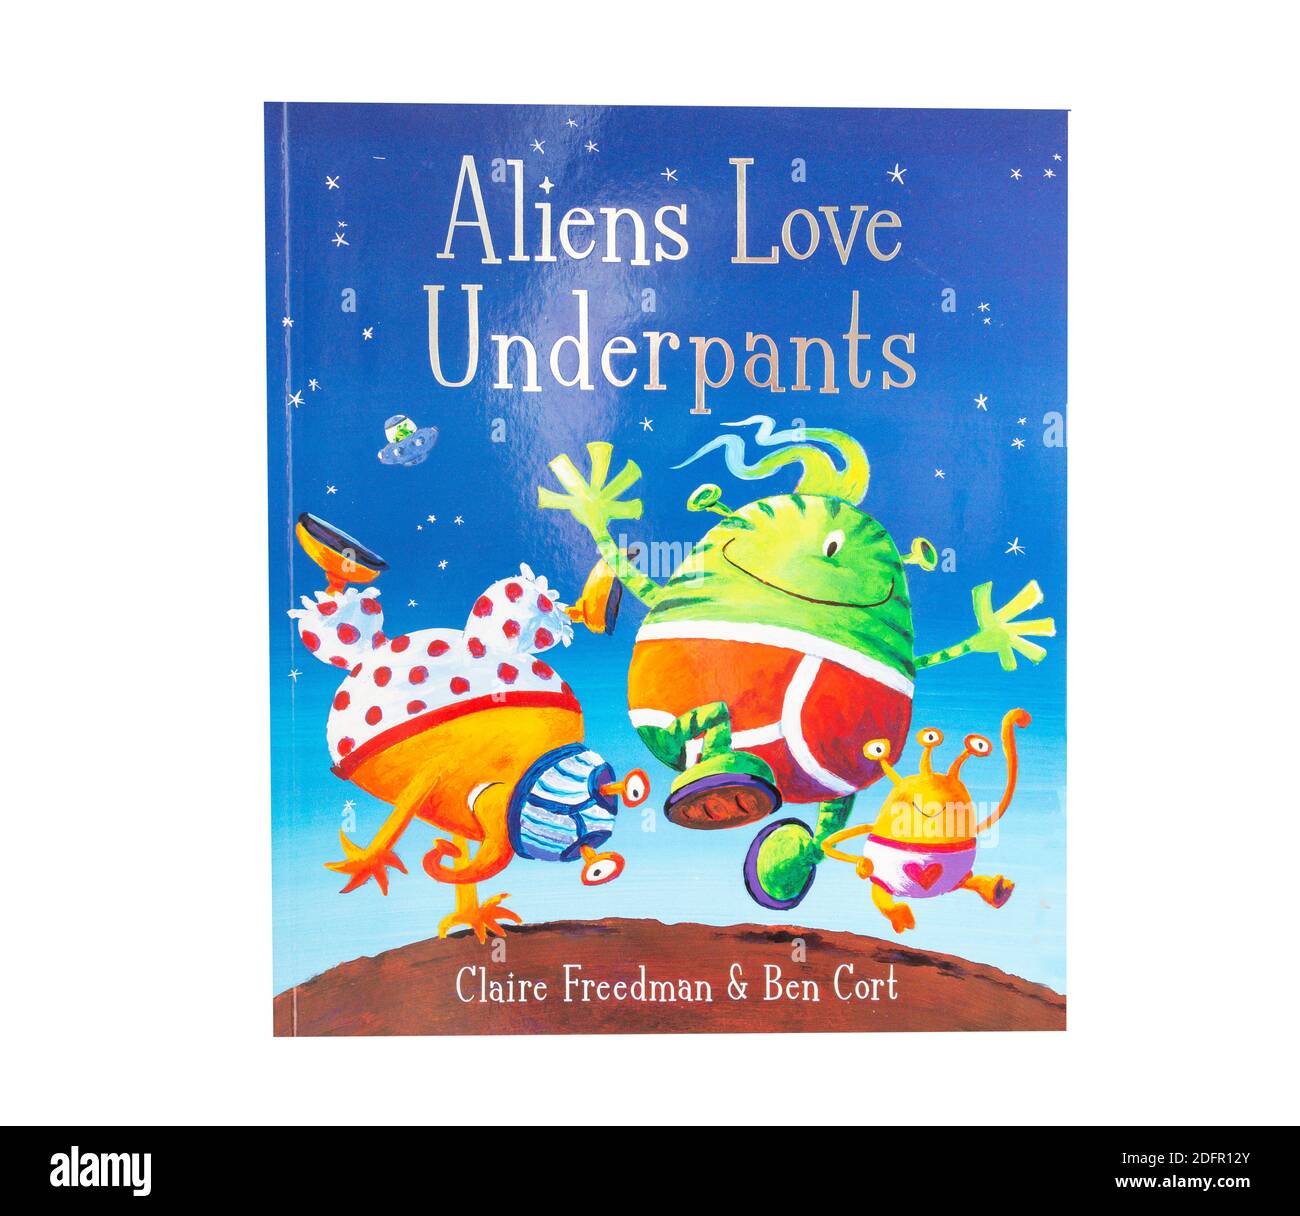 Aliens Love Underpants by Claire Freedman & Ben Cort, Greater London, England, United Kingdom Stock Photo